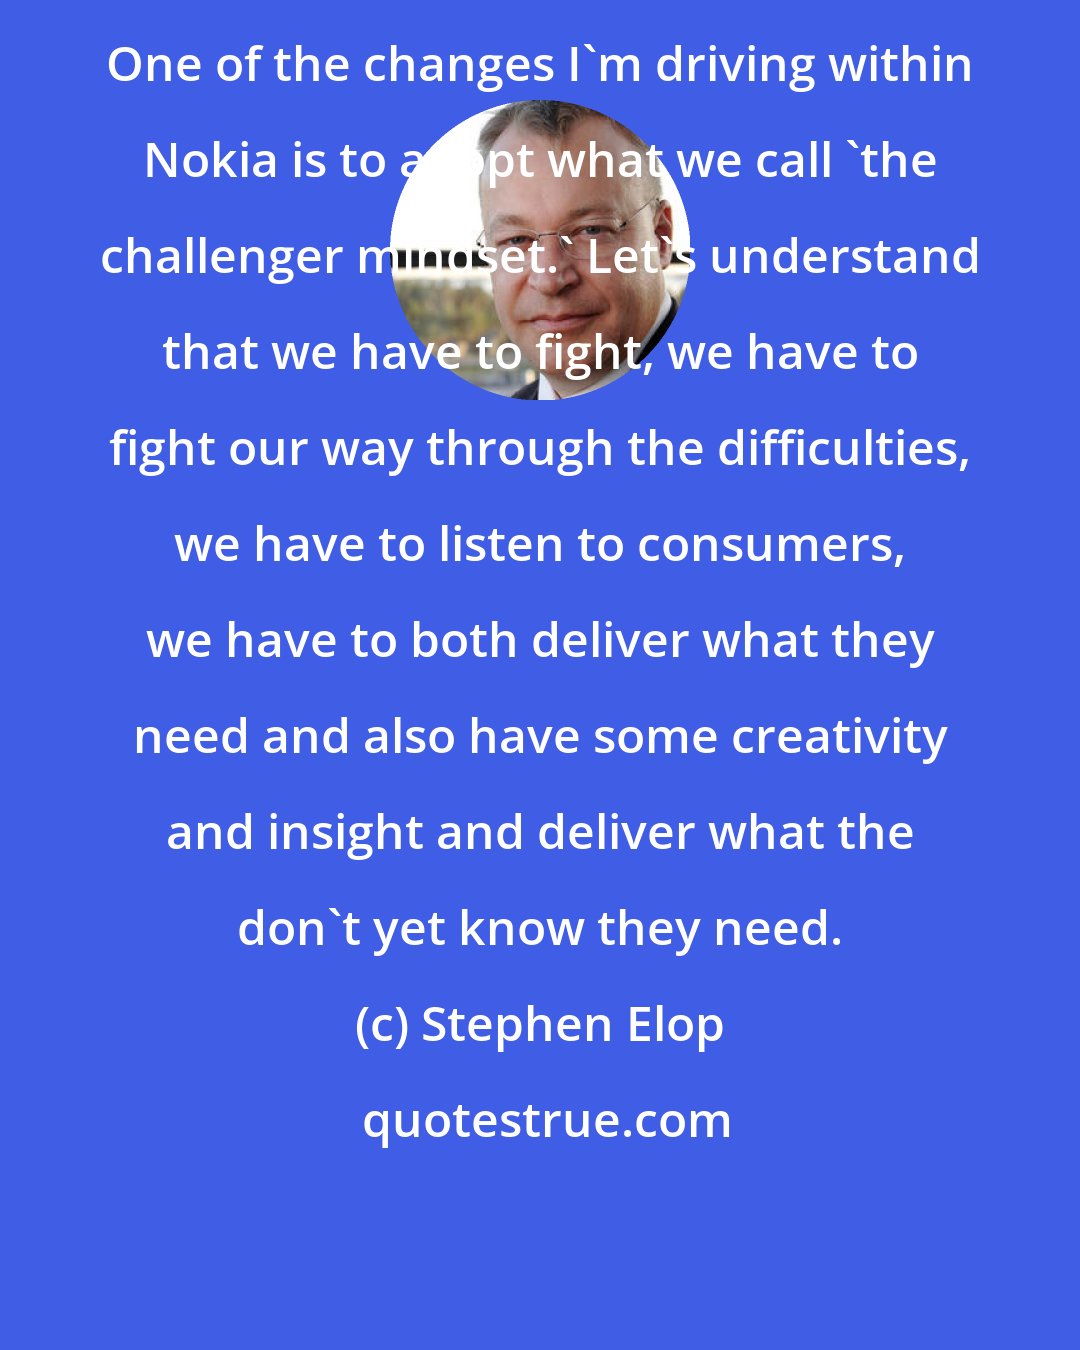 Stephen Elop: One of the changes I'm driving within Nokia is to adopt what we call 'the challenger mindset.' Let's understand that we have to fight, we have to fight our way through the difficulties, we have to listen to consumers, we have to both deliver what they need and also have some creativity and insight and deliver what the don't yet know they need.